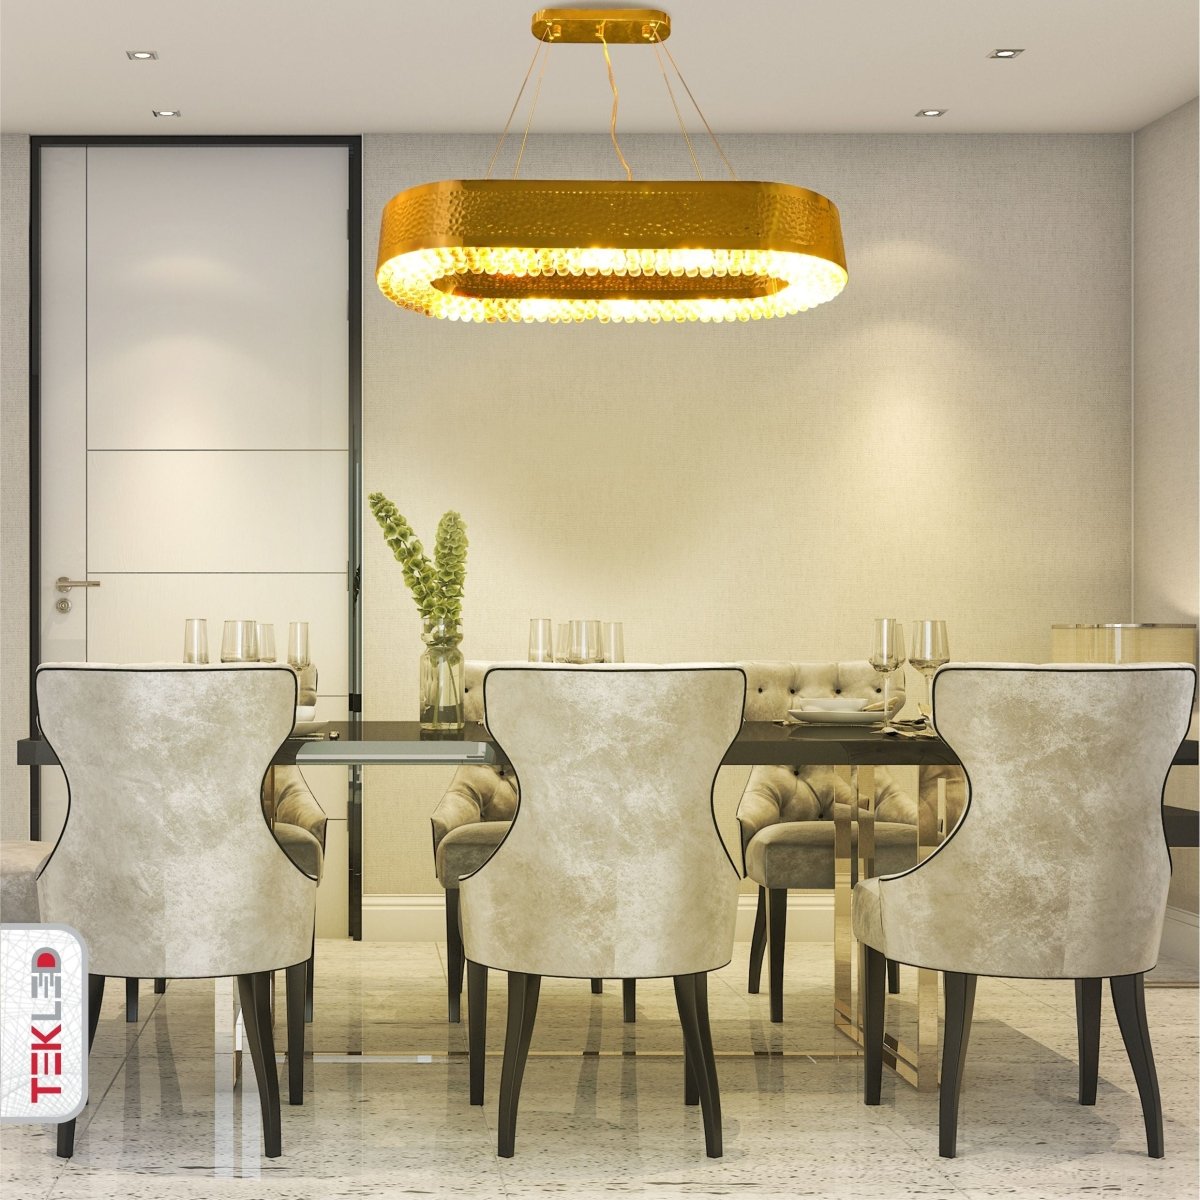 Indoor usage of Ball Crystal Gold Metal Island Chandelier L850 with 10XE14 Fitting | TEKLED 156-19566